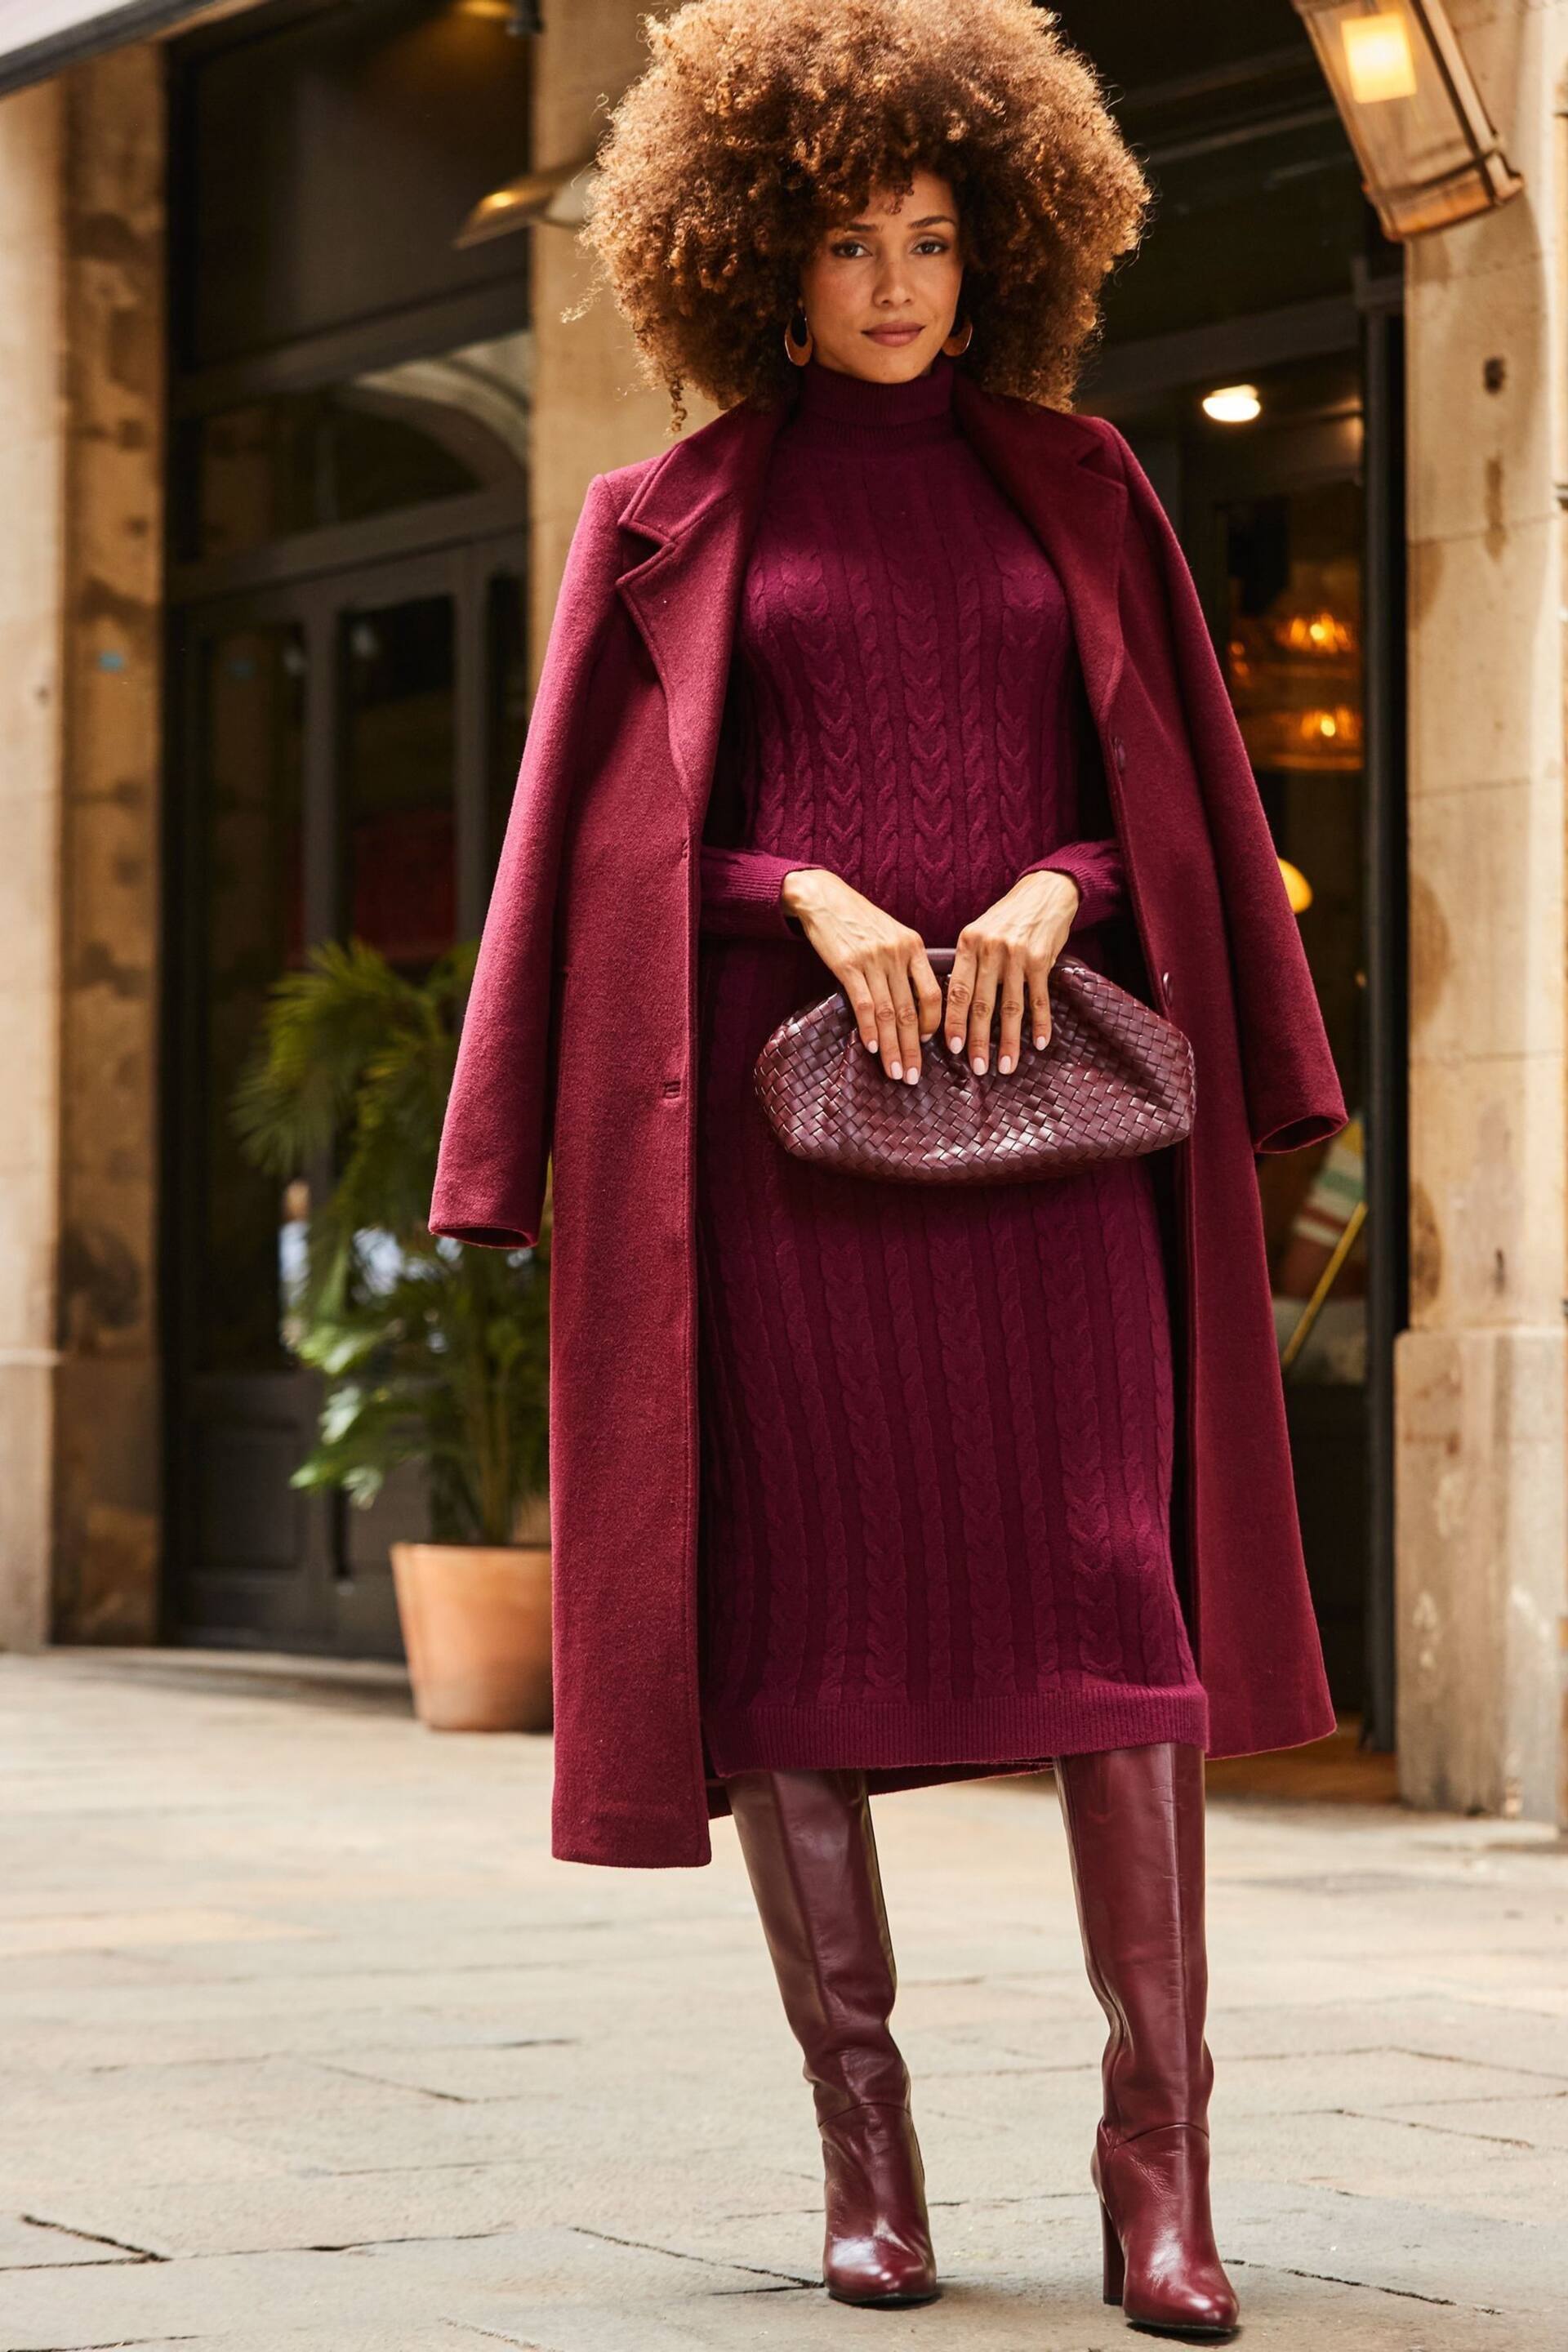 Sosandar Red Fitted Roll Neck Cable Knit Dress - Image 3 of 5